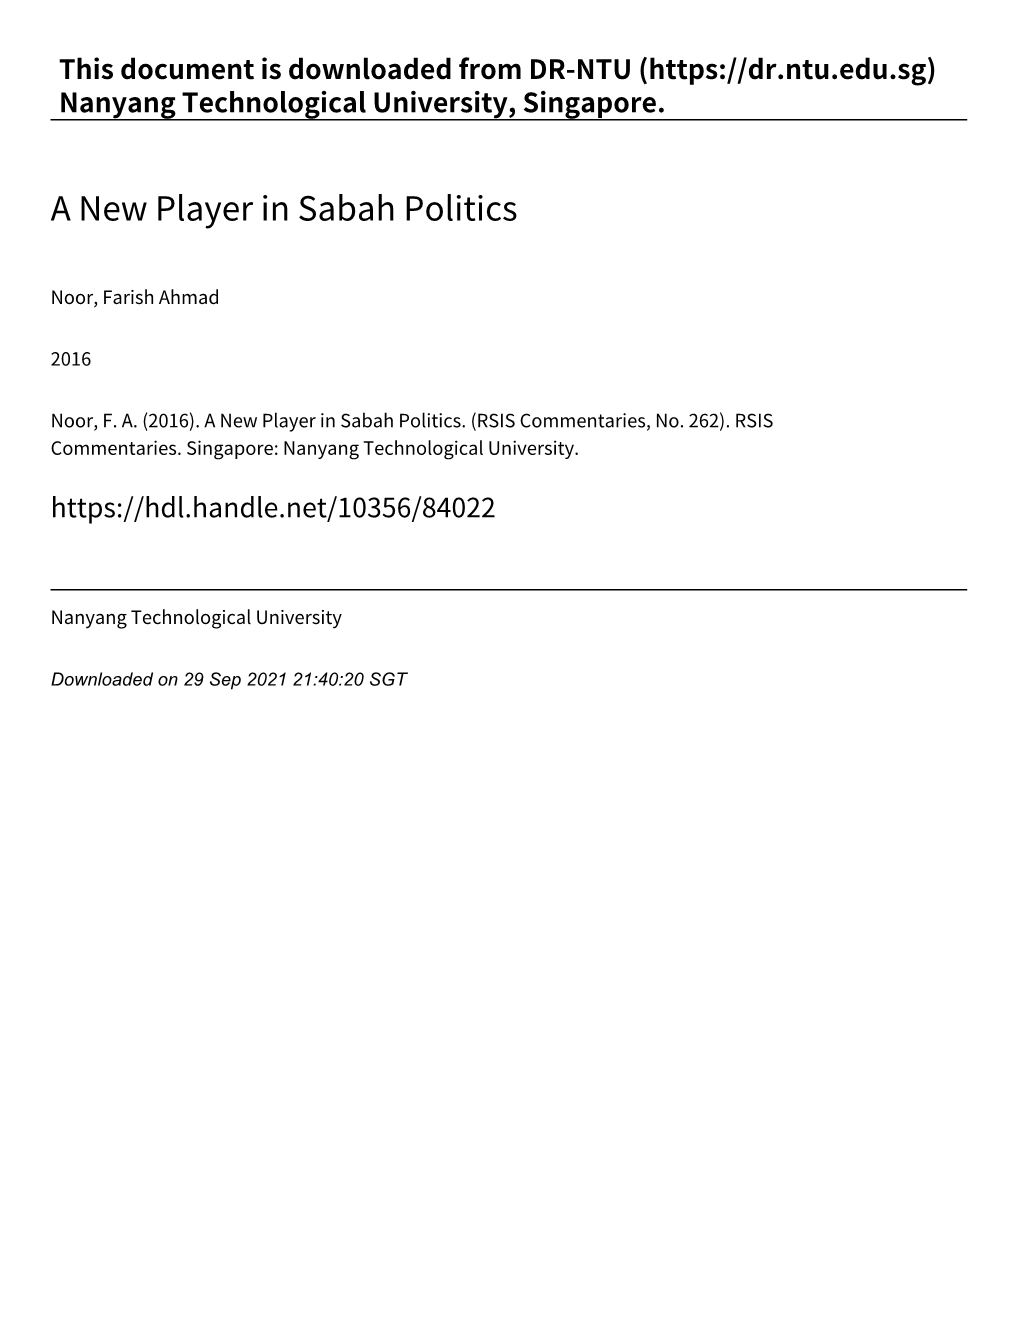 A New Player in Sabah Politics